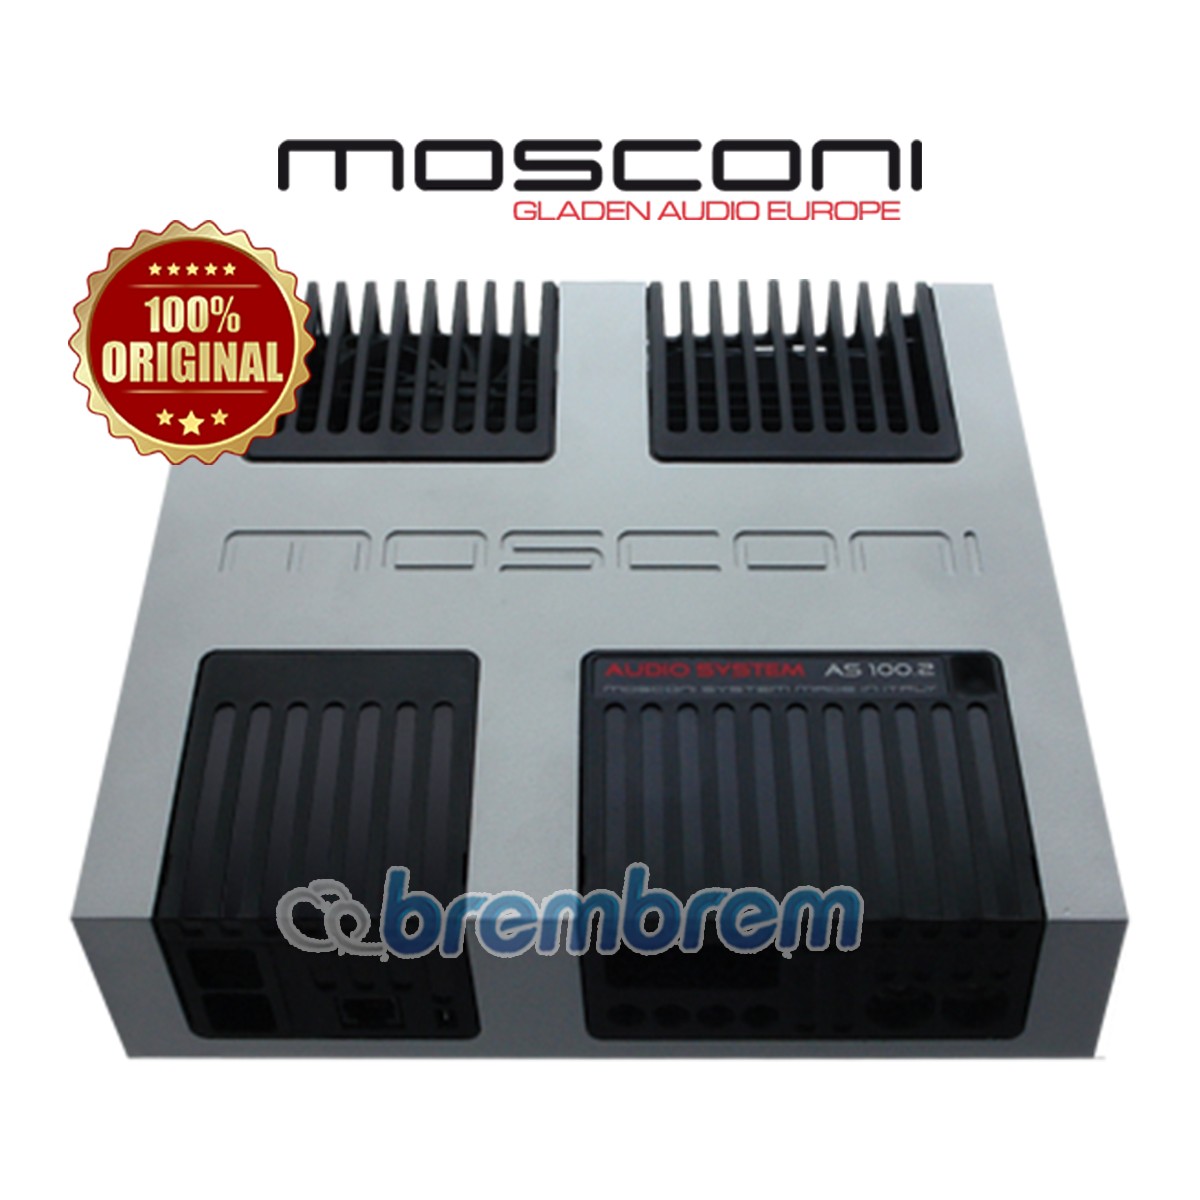 MOSCONI AS 100.2 - POWER 2 CHANNEL